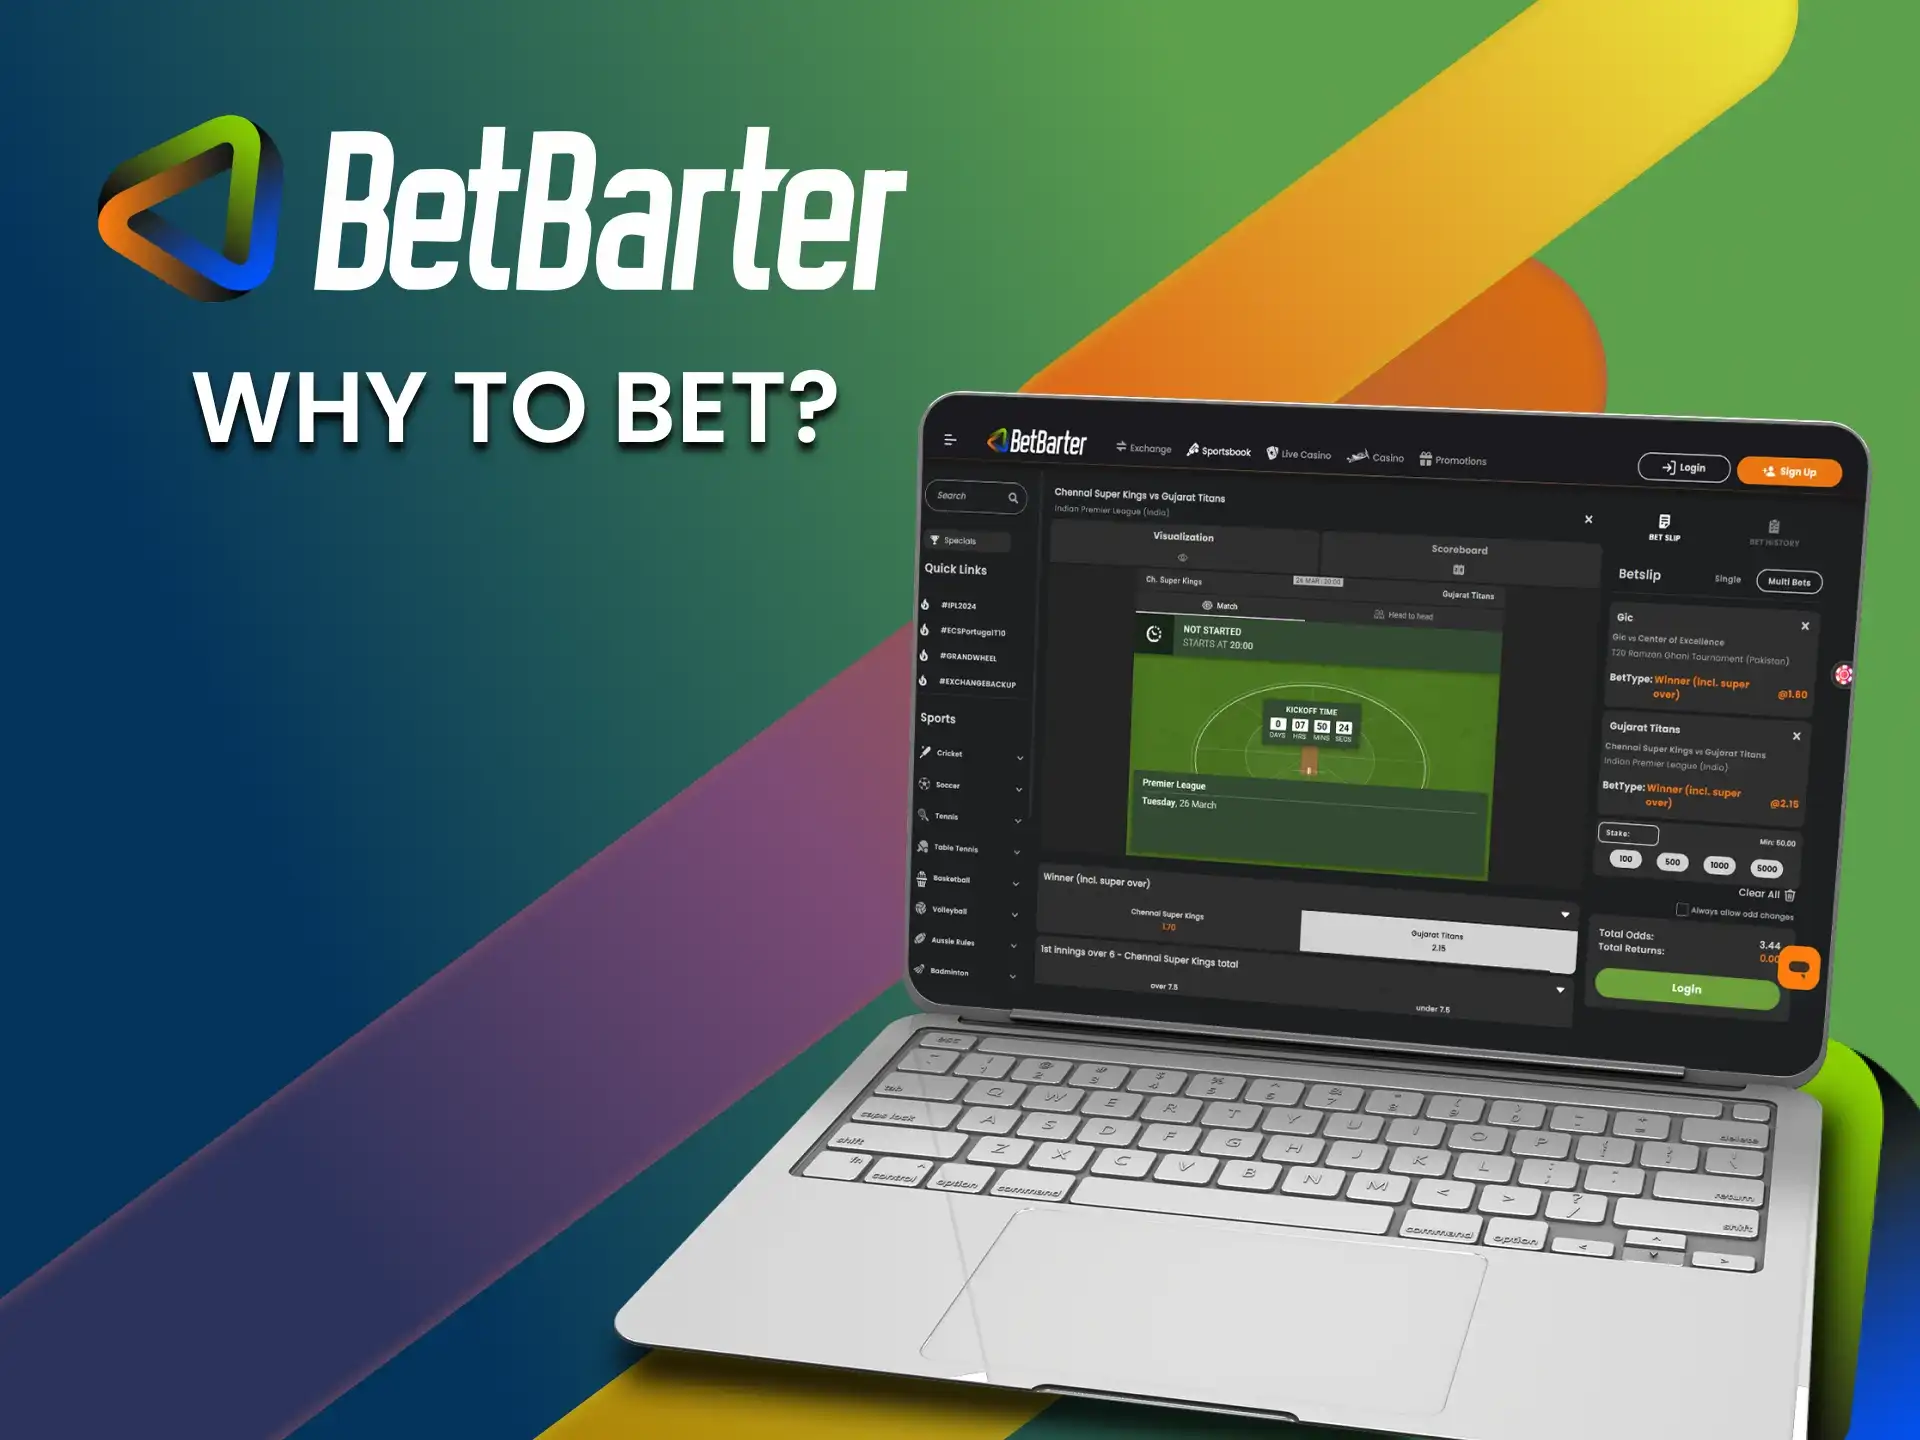 BetBarter online is a cool casino game and betting that will help you immerse yourself in the world of gambling.